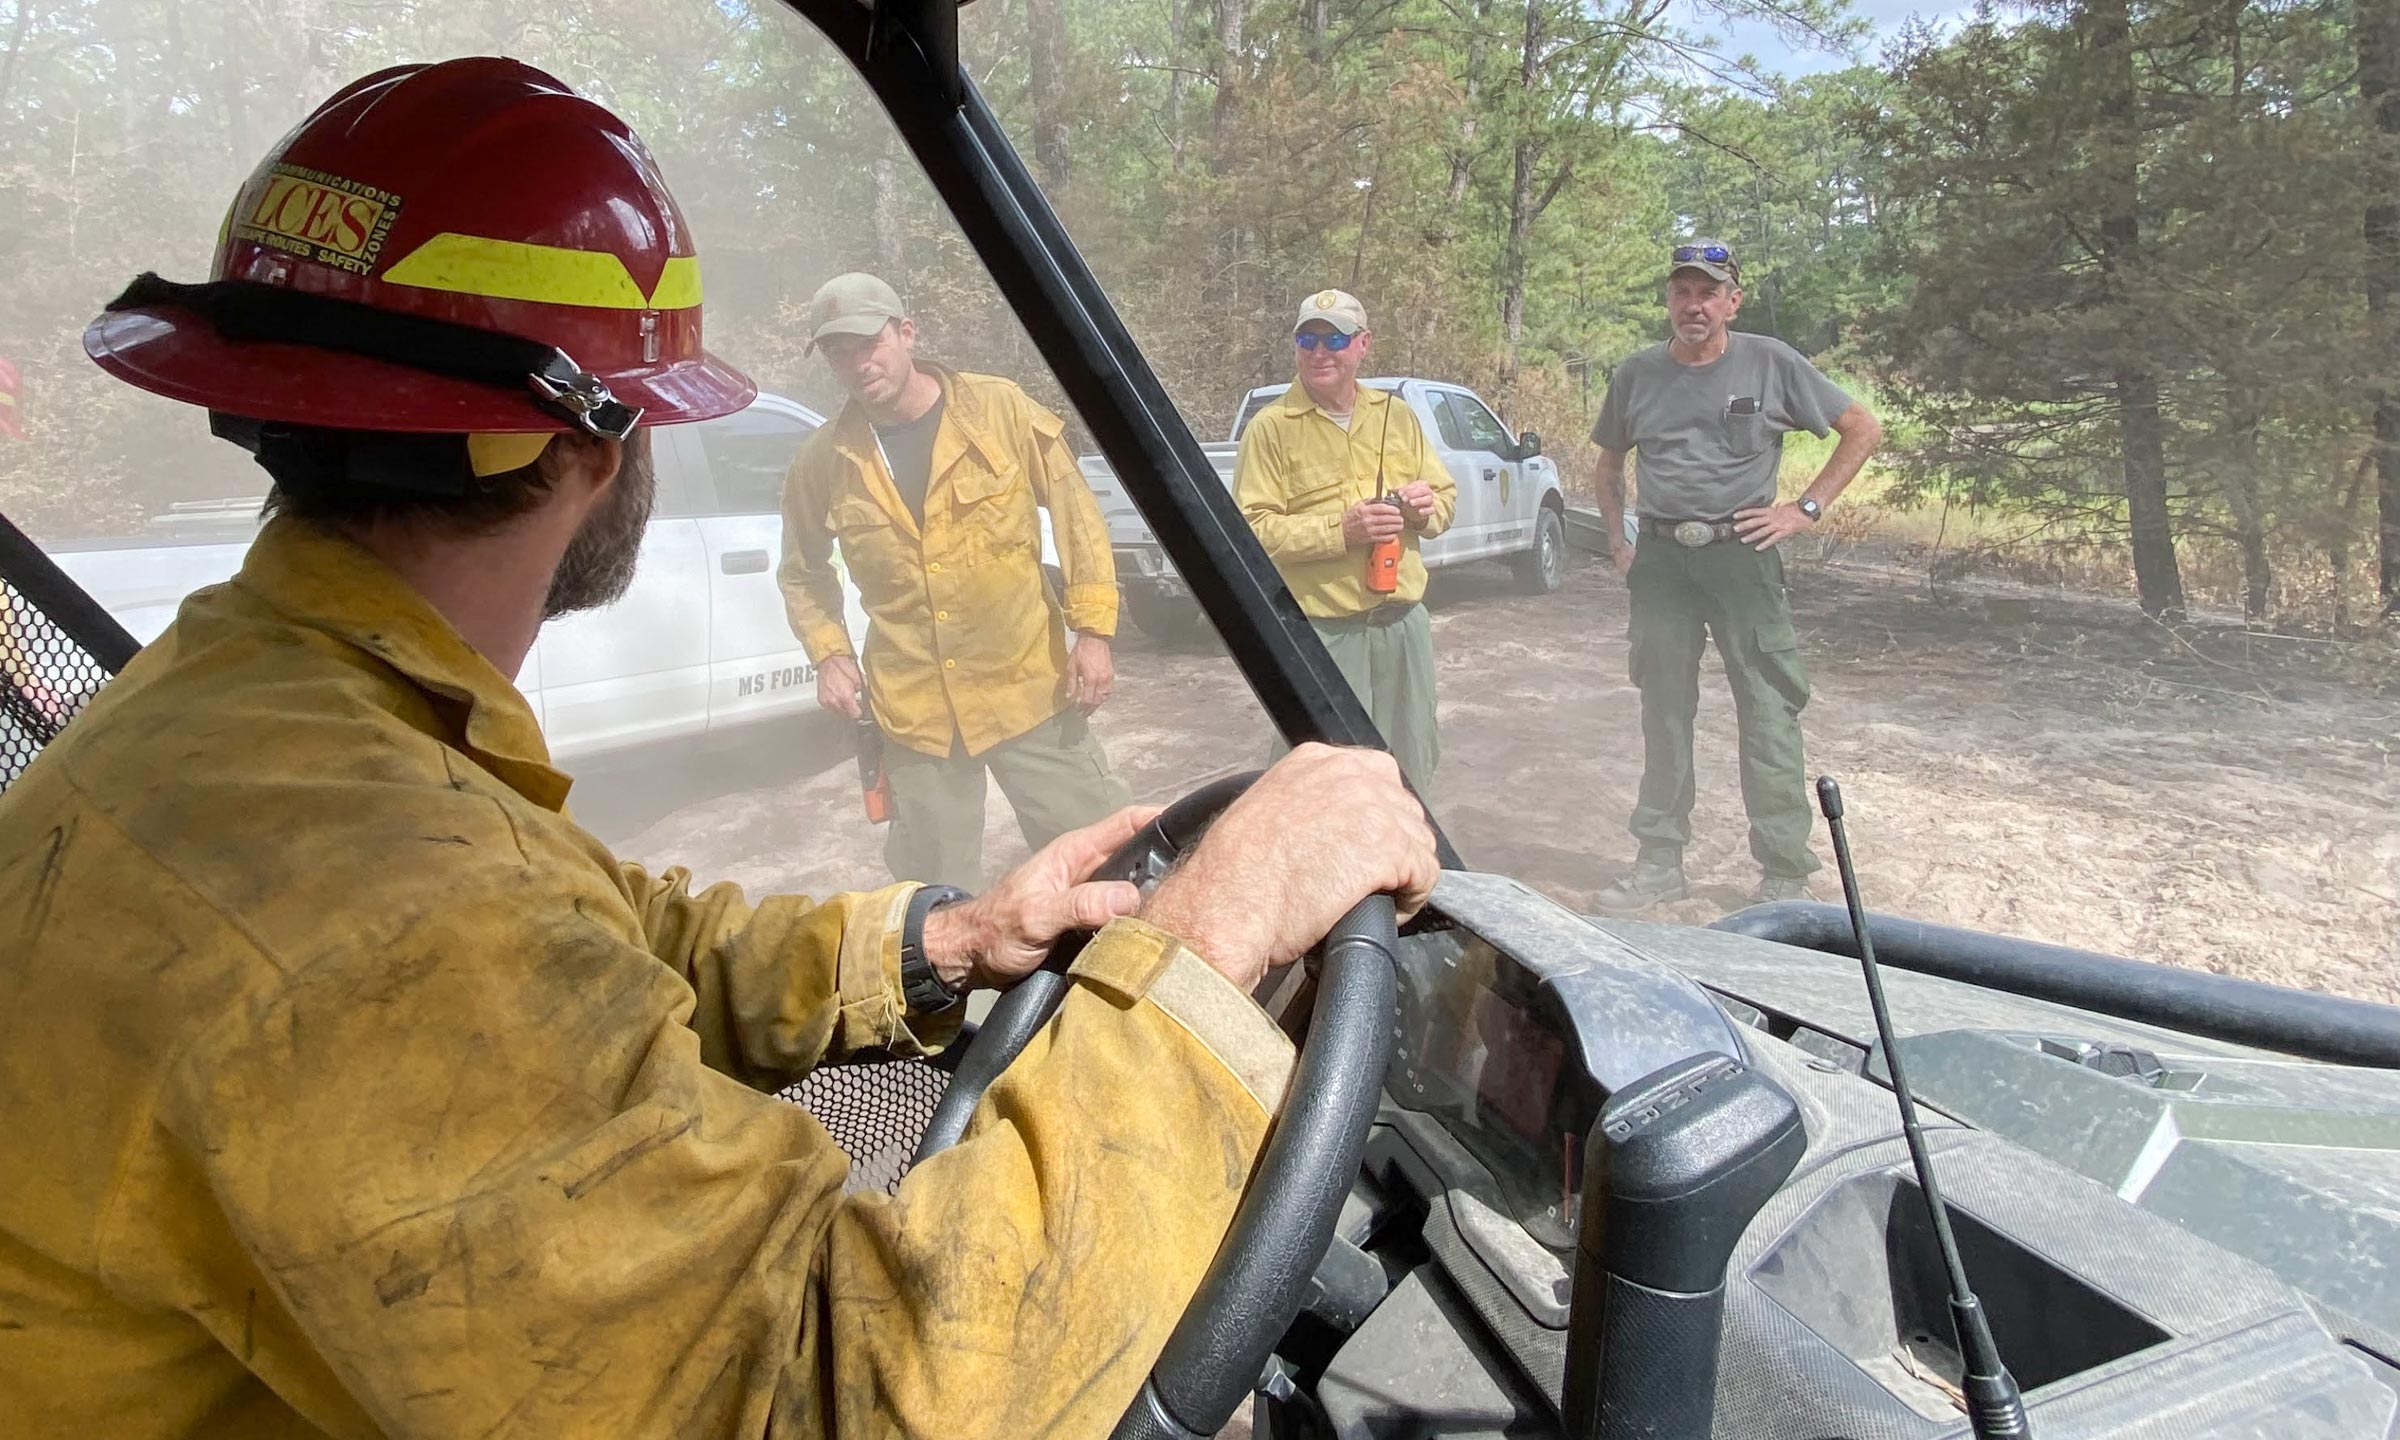 Firefighter at wheel of vehicle consults with colleagues outdoors